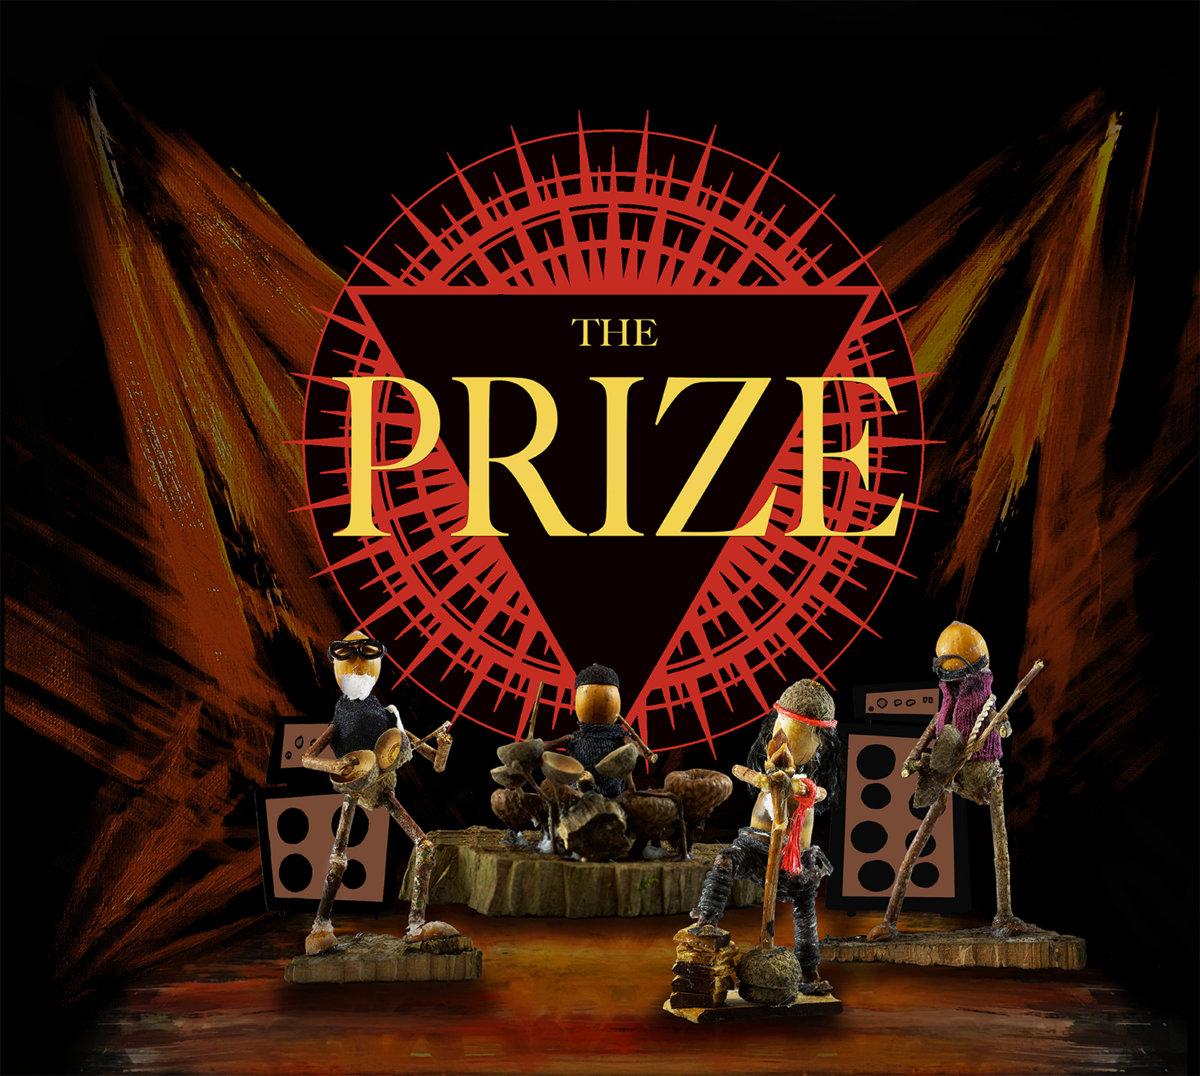 THE PRIZE